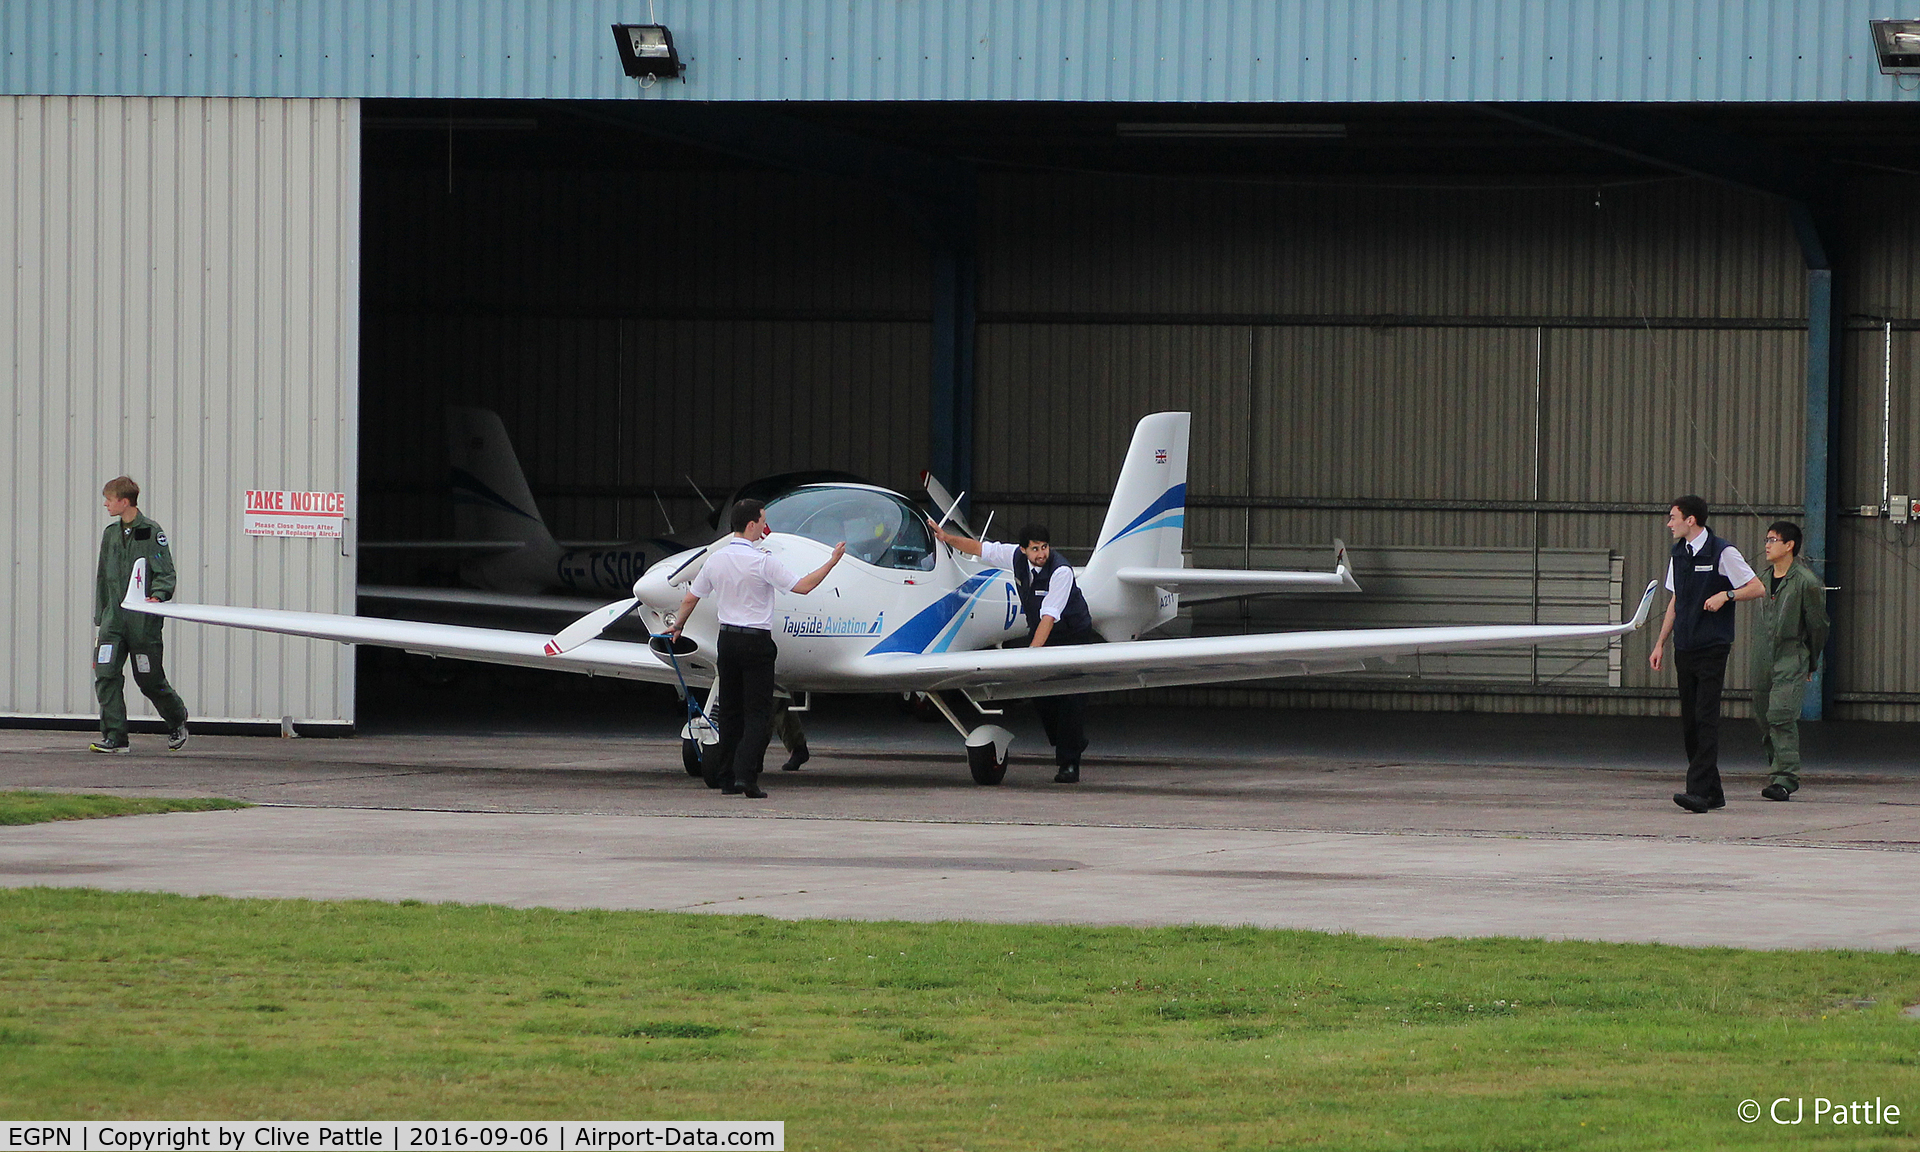 Dundee Airport, Dundee, Scotland United Kingdom (EGPN) - Early morning activity with Tayside Aviation at Dundee EGPN